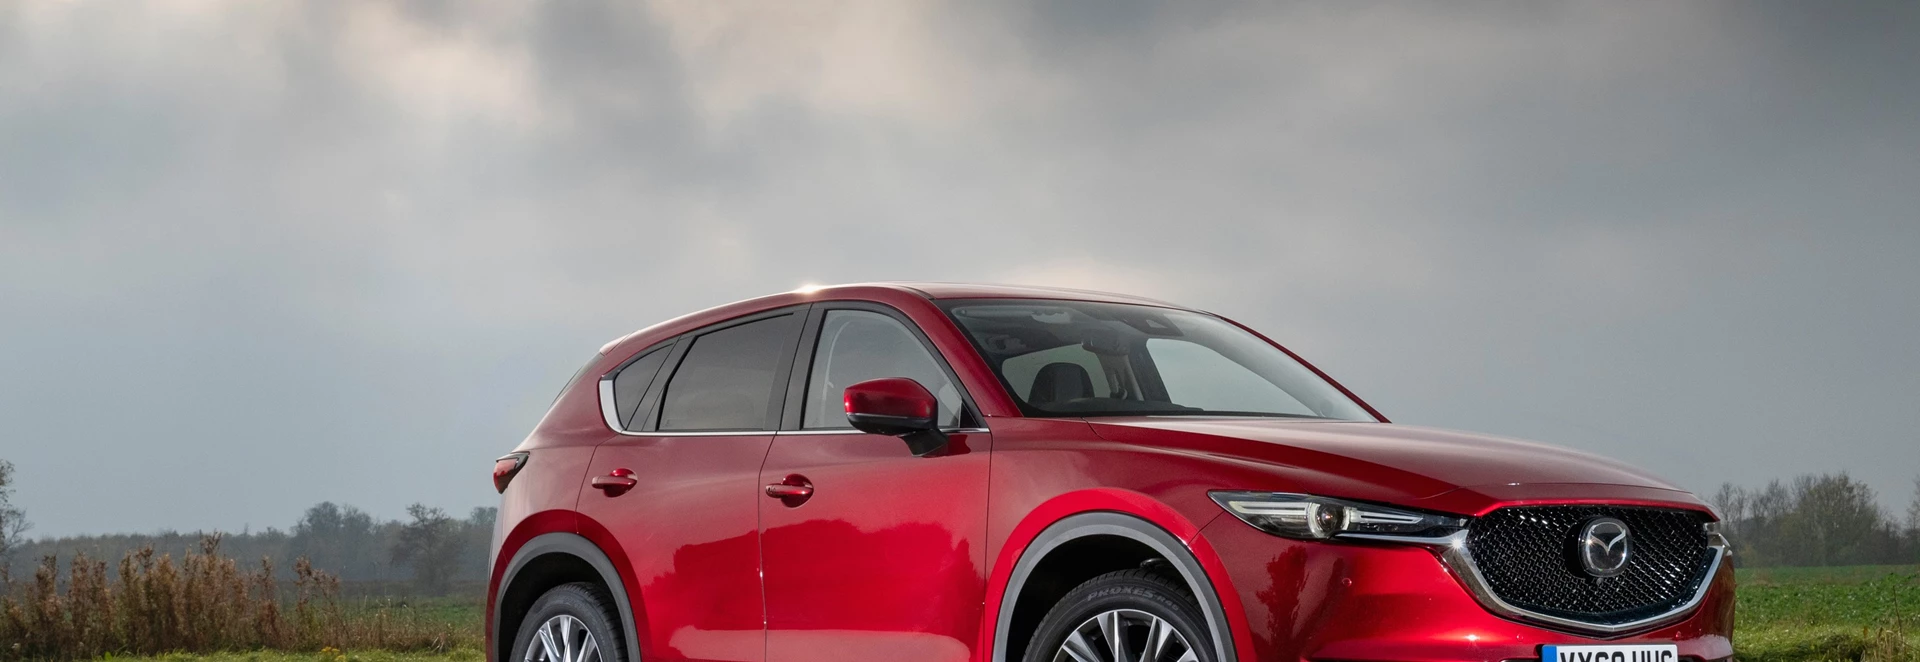 Mazda updates CX-5 and adds new flagship trim level